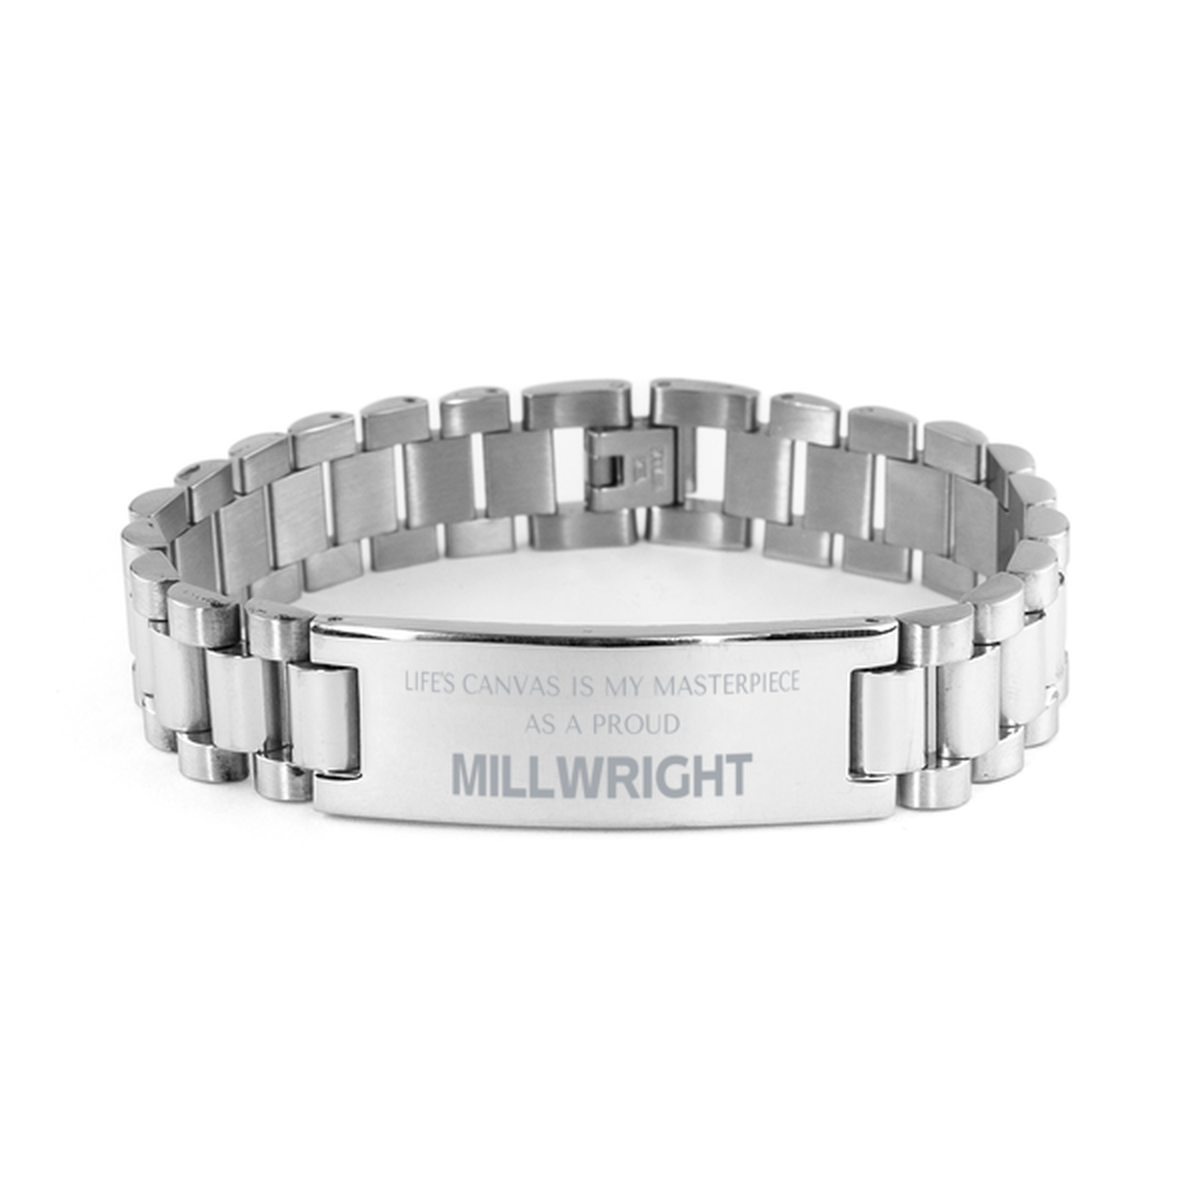 Proud Millwright Gifts, Life's canvas is my masterpiece, Epic Birthday Christmas Unique Ladder Stainless Steel Bracelet For Millwright, Coworkers, Men, Women, Friends